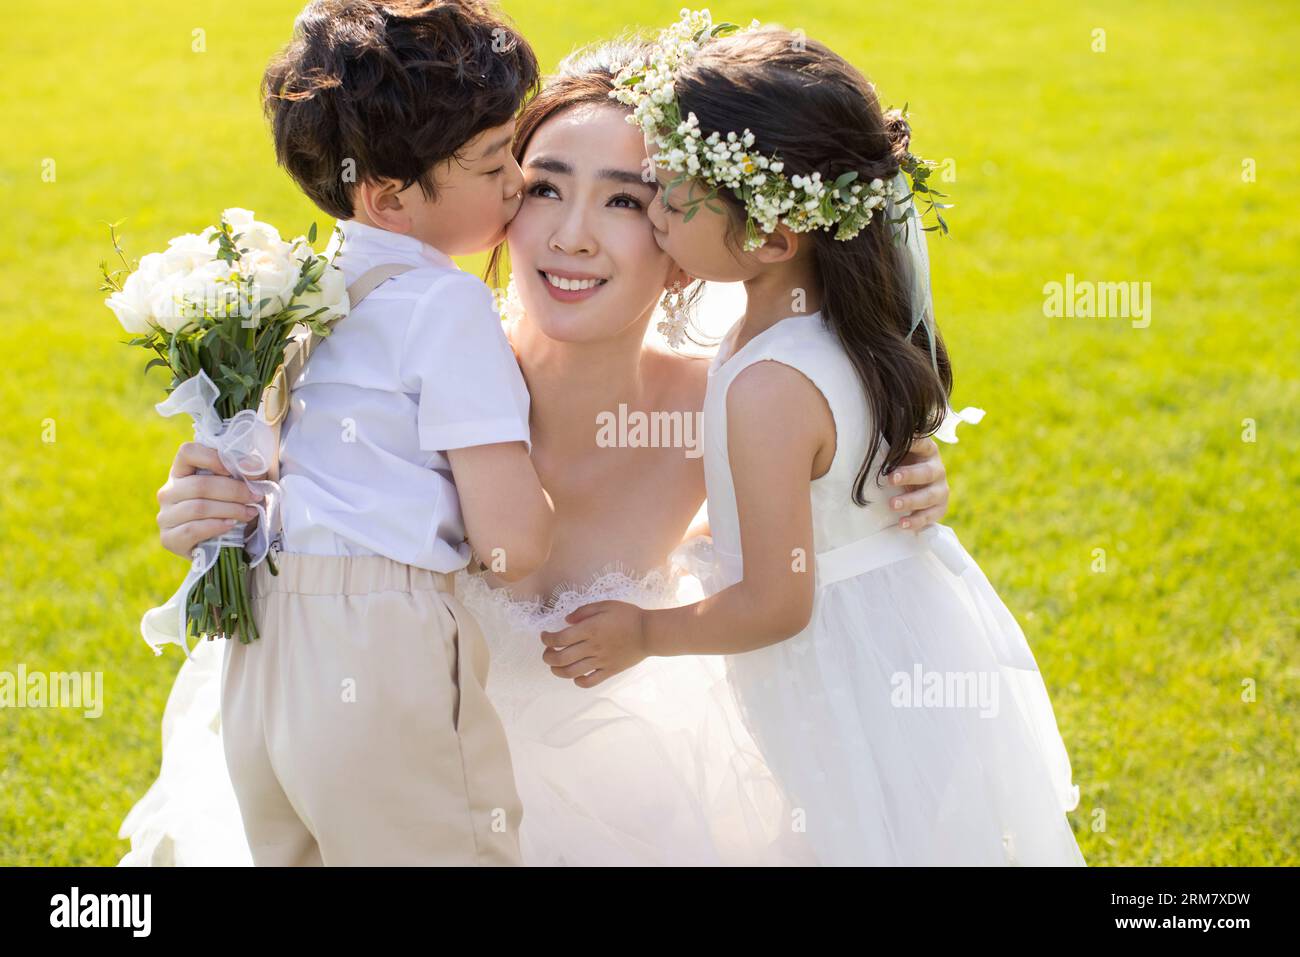 Beautiful bride with flower girl and ring bearer Stock Photo